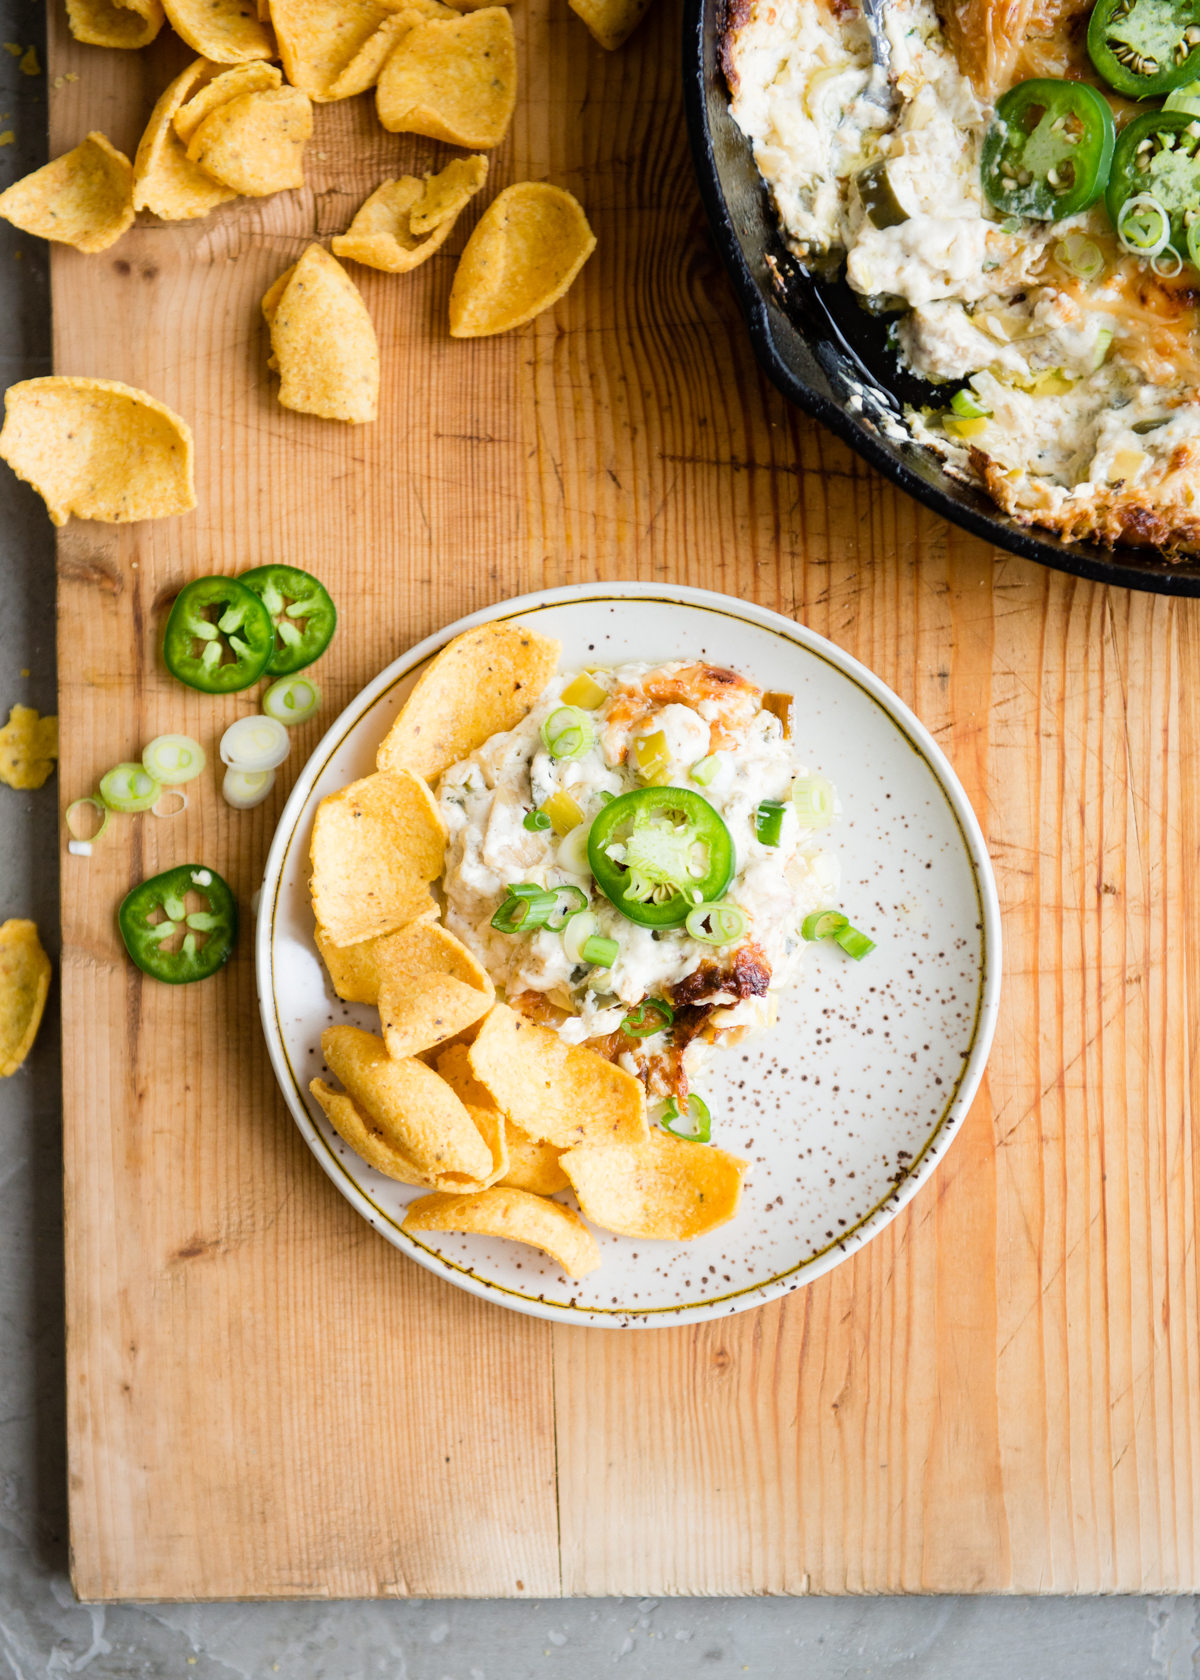 The Ultimate Spicy Jalapeño Artichoke Dip with Corn Chips | DesignMom.com